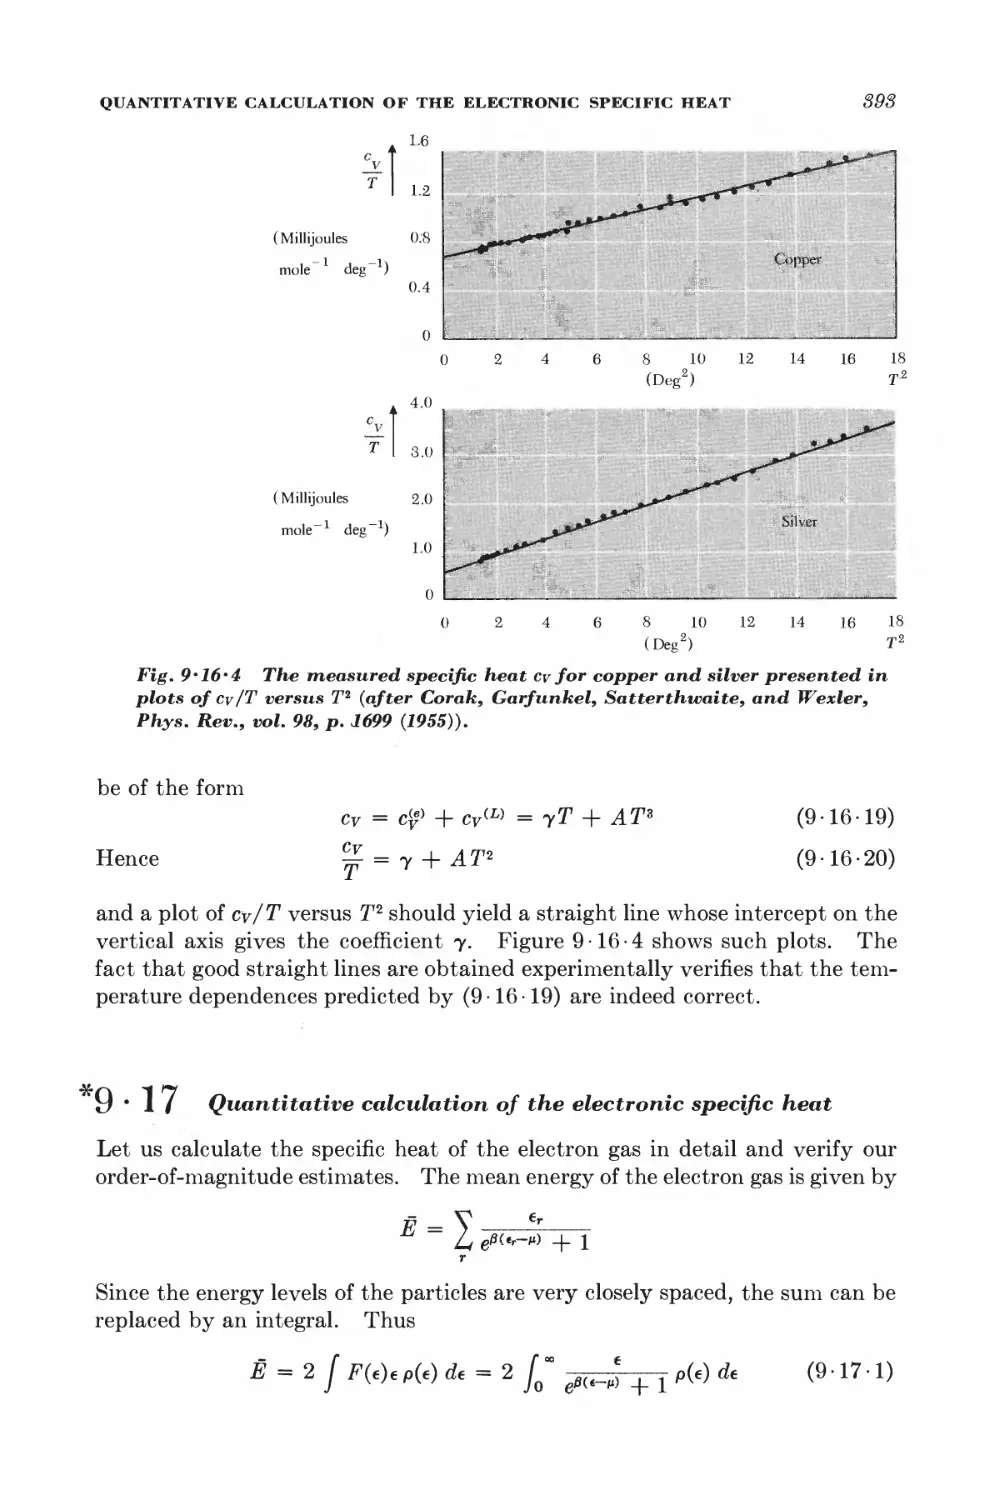 9.17 Quantitative calculation of the electronic specific heat